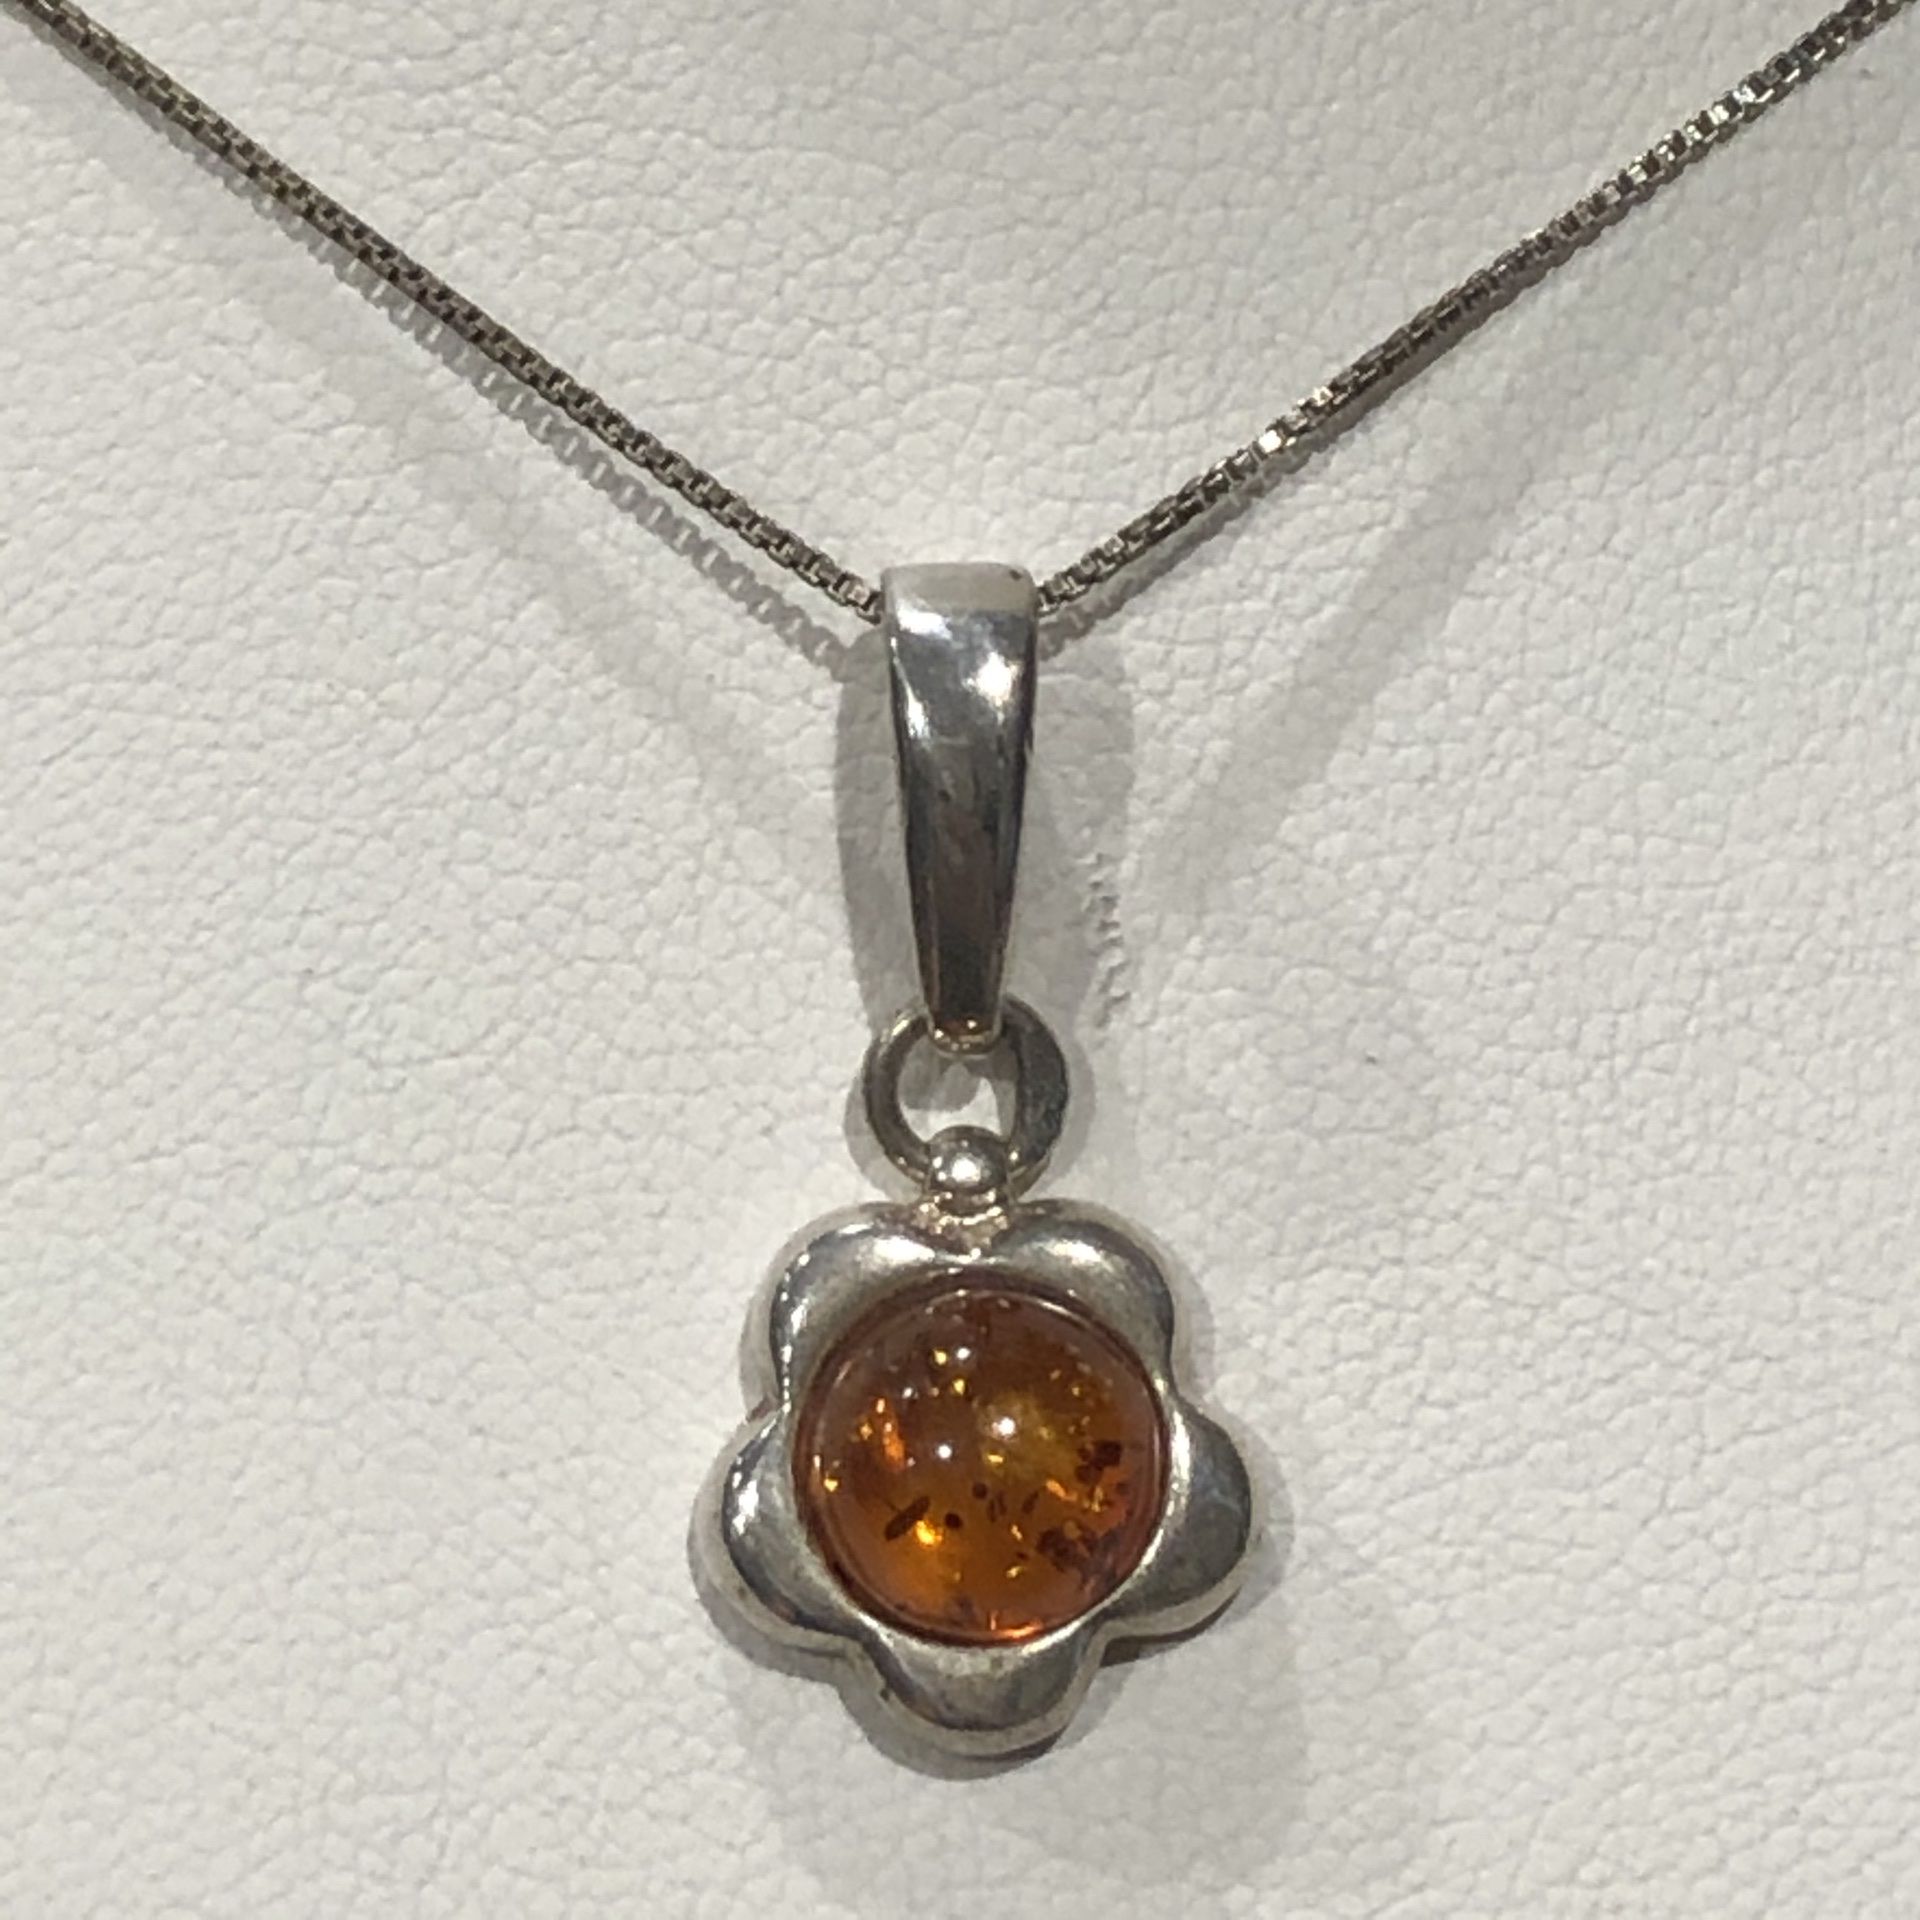 Sterling Silver Pendant Necklace with Amber Stone